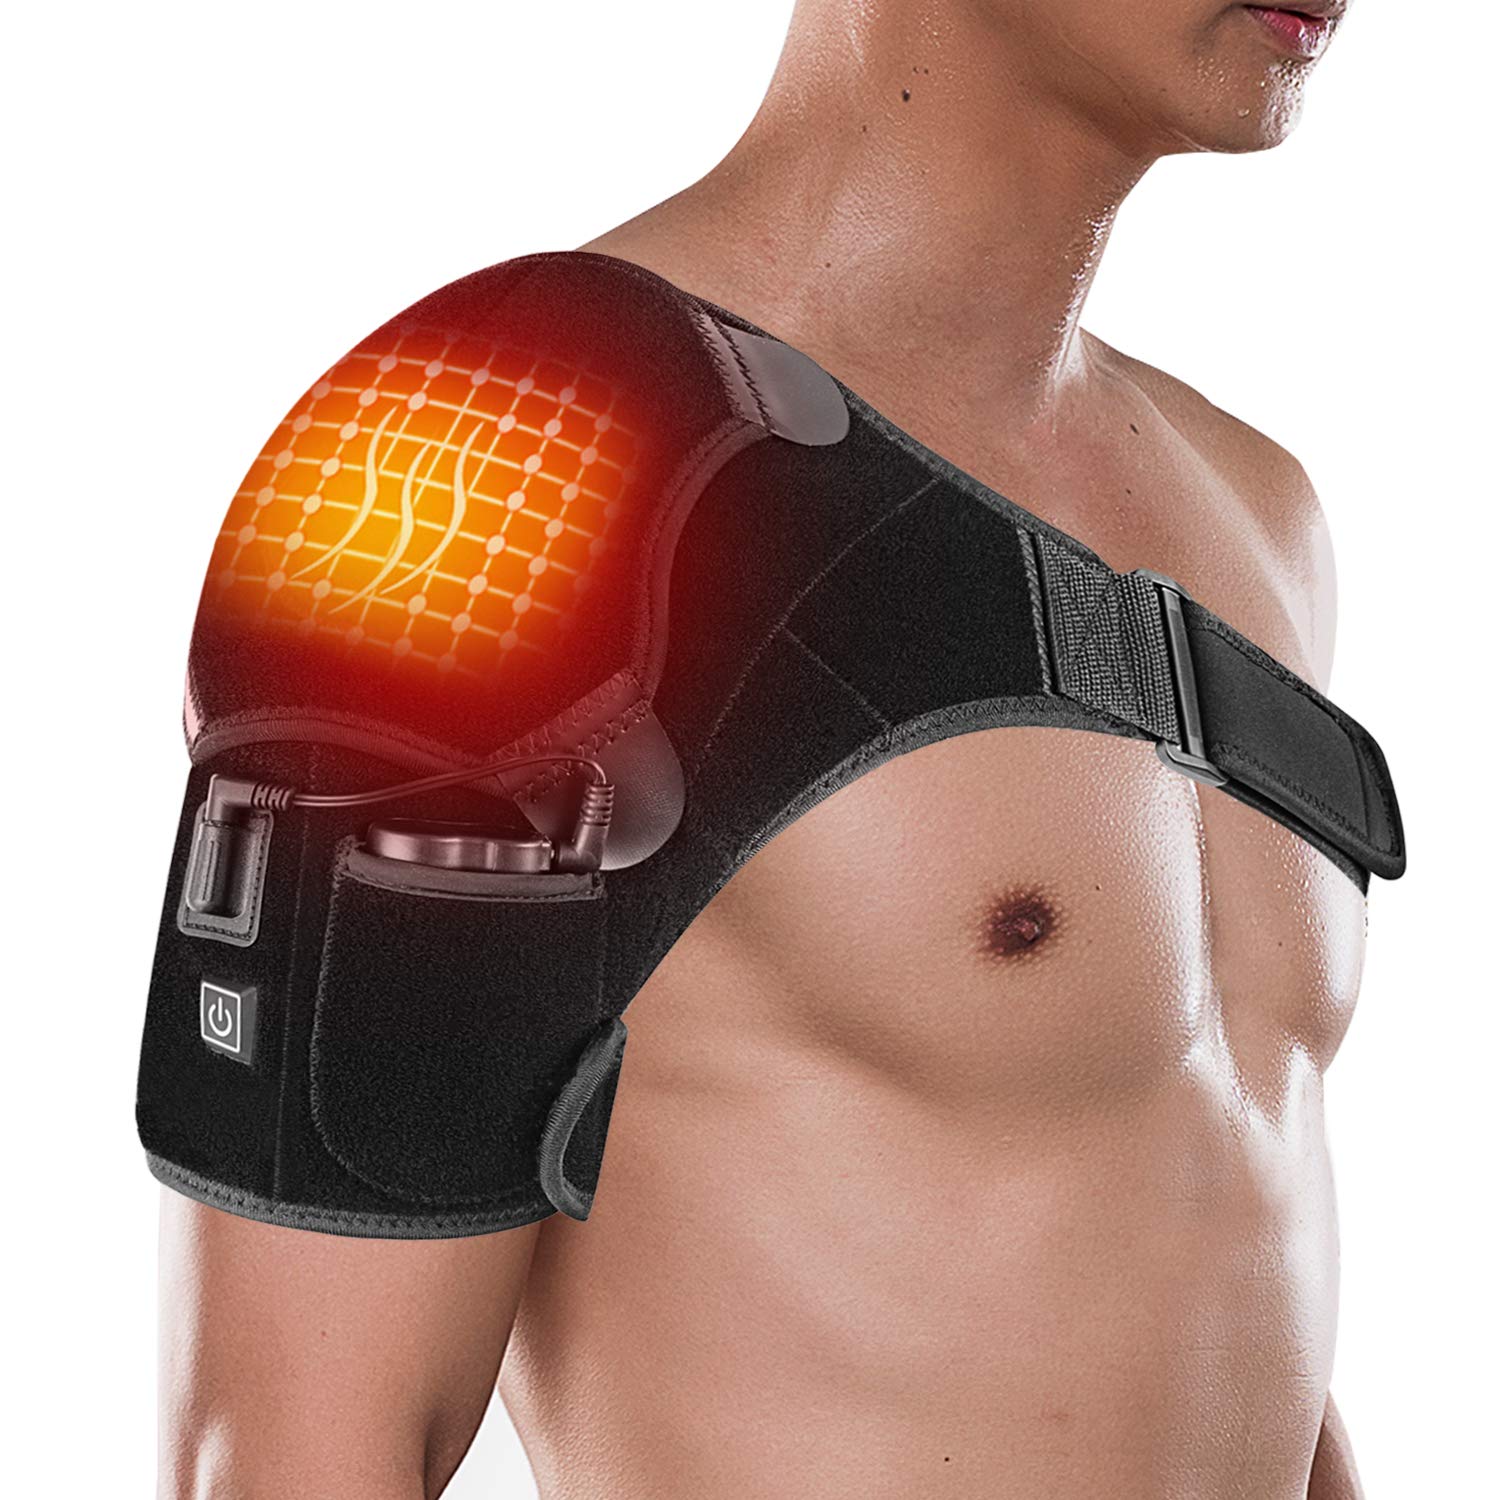 Heated Shoulder Brace Wrap with Battery Portable Electric Wireless Heating  Pad Strap with Hot Cold Therapy for Rotator Cuff Frozen Shoulder Relax  Muscle Pain Relief Shoulder Compression Sleeve